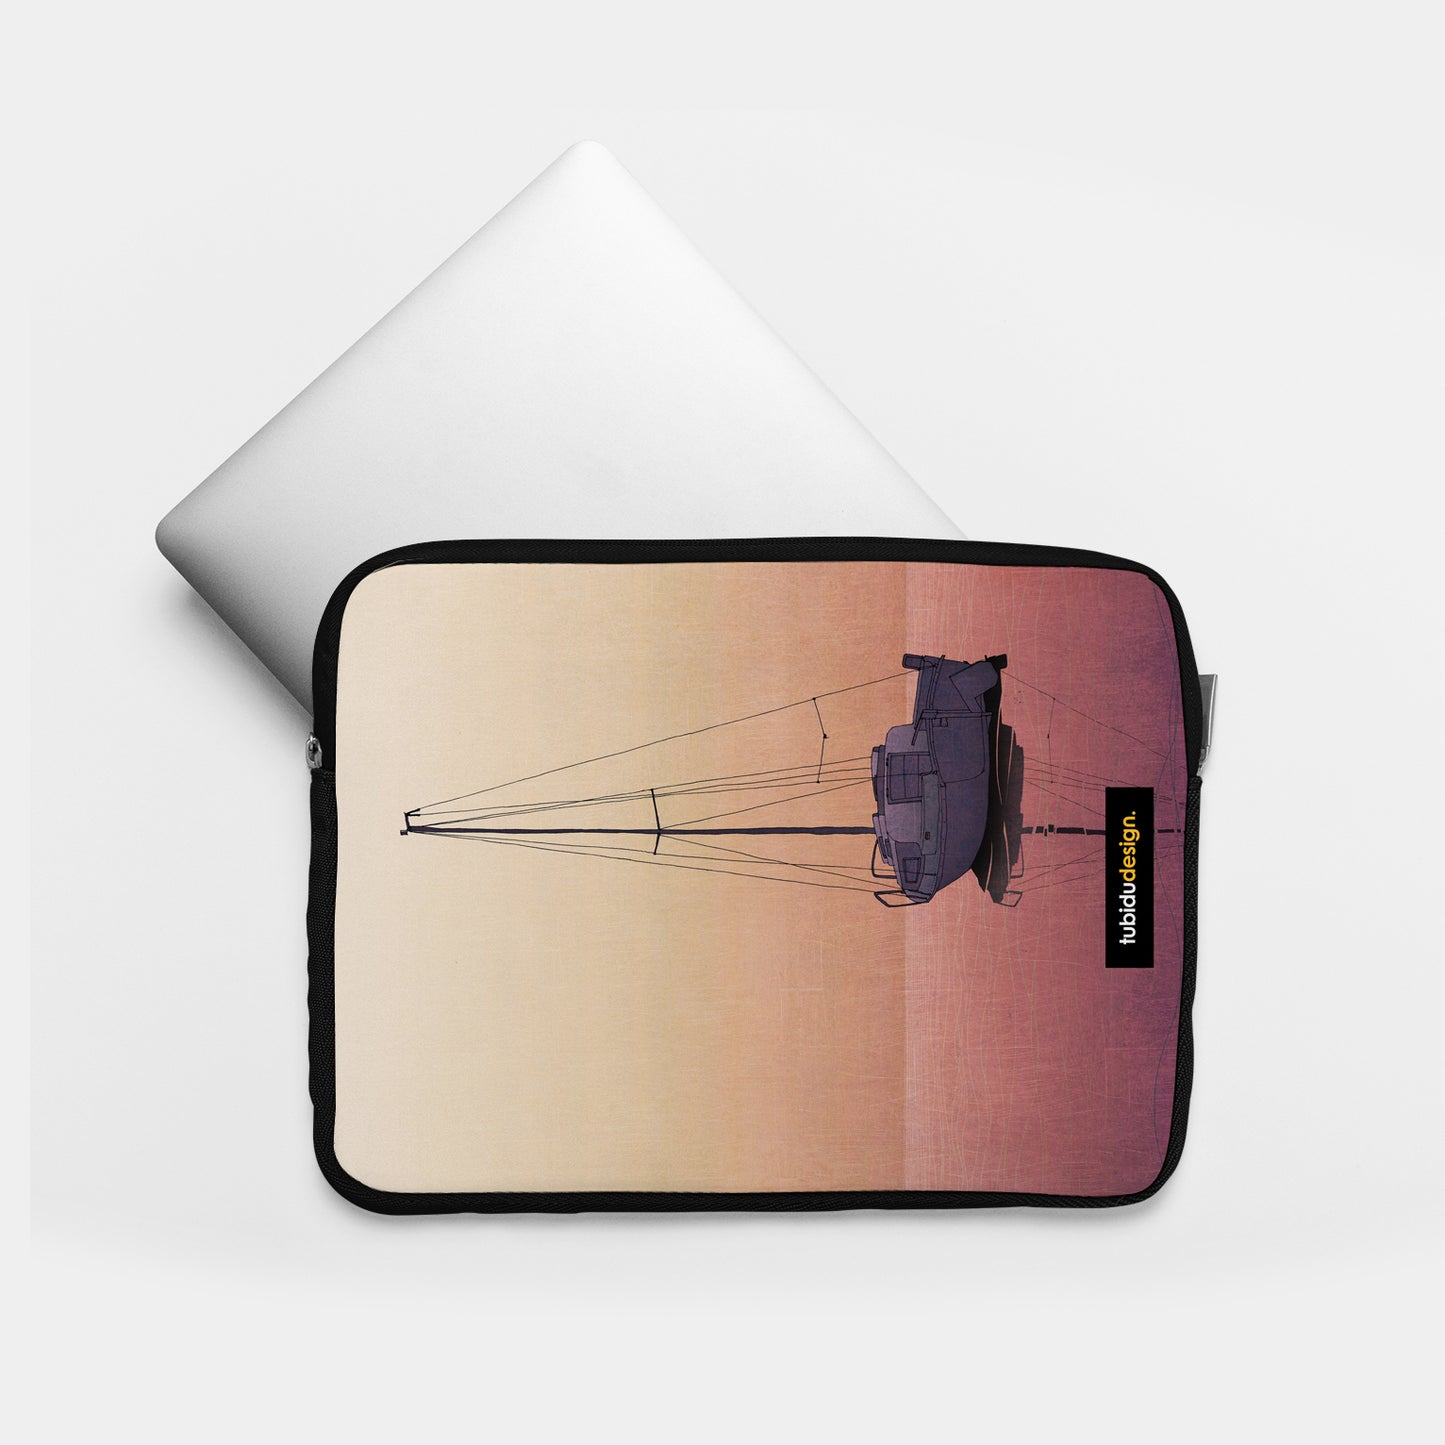 Calm waters - Illustrated Laptop Sleeve